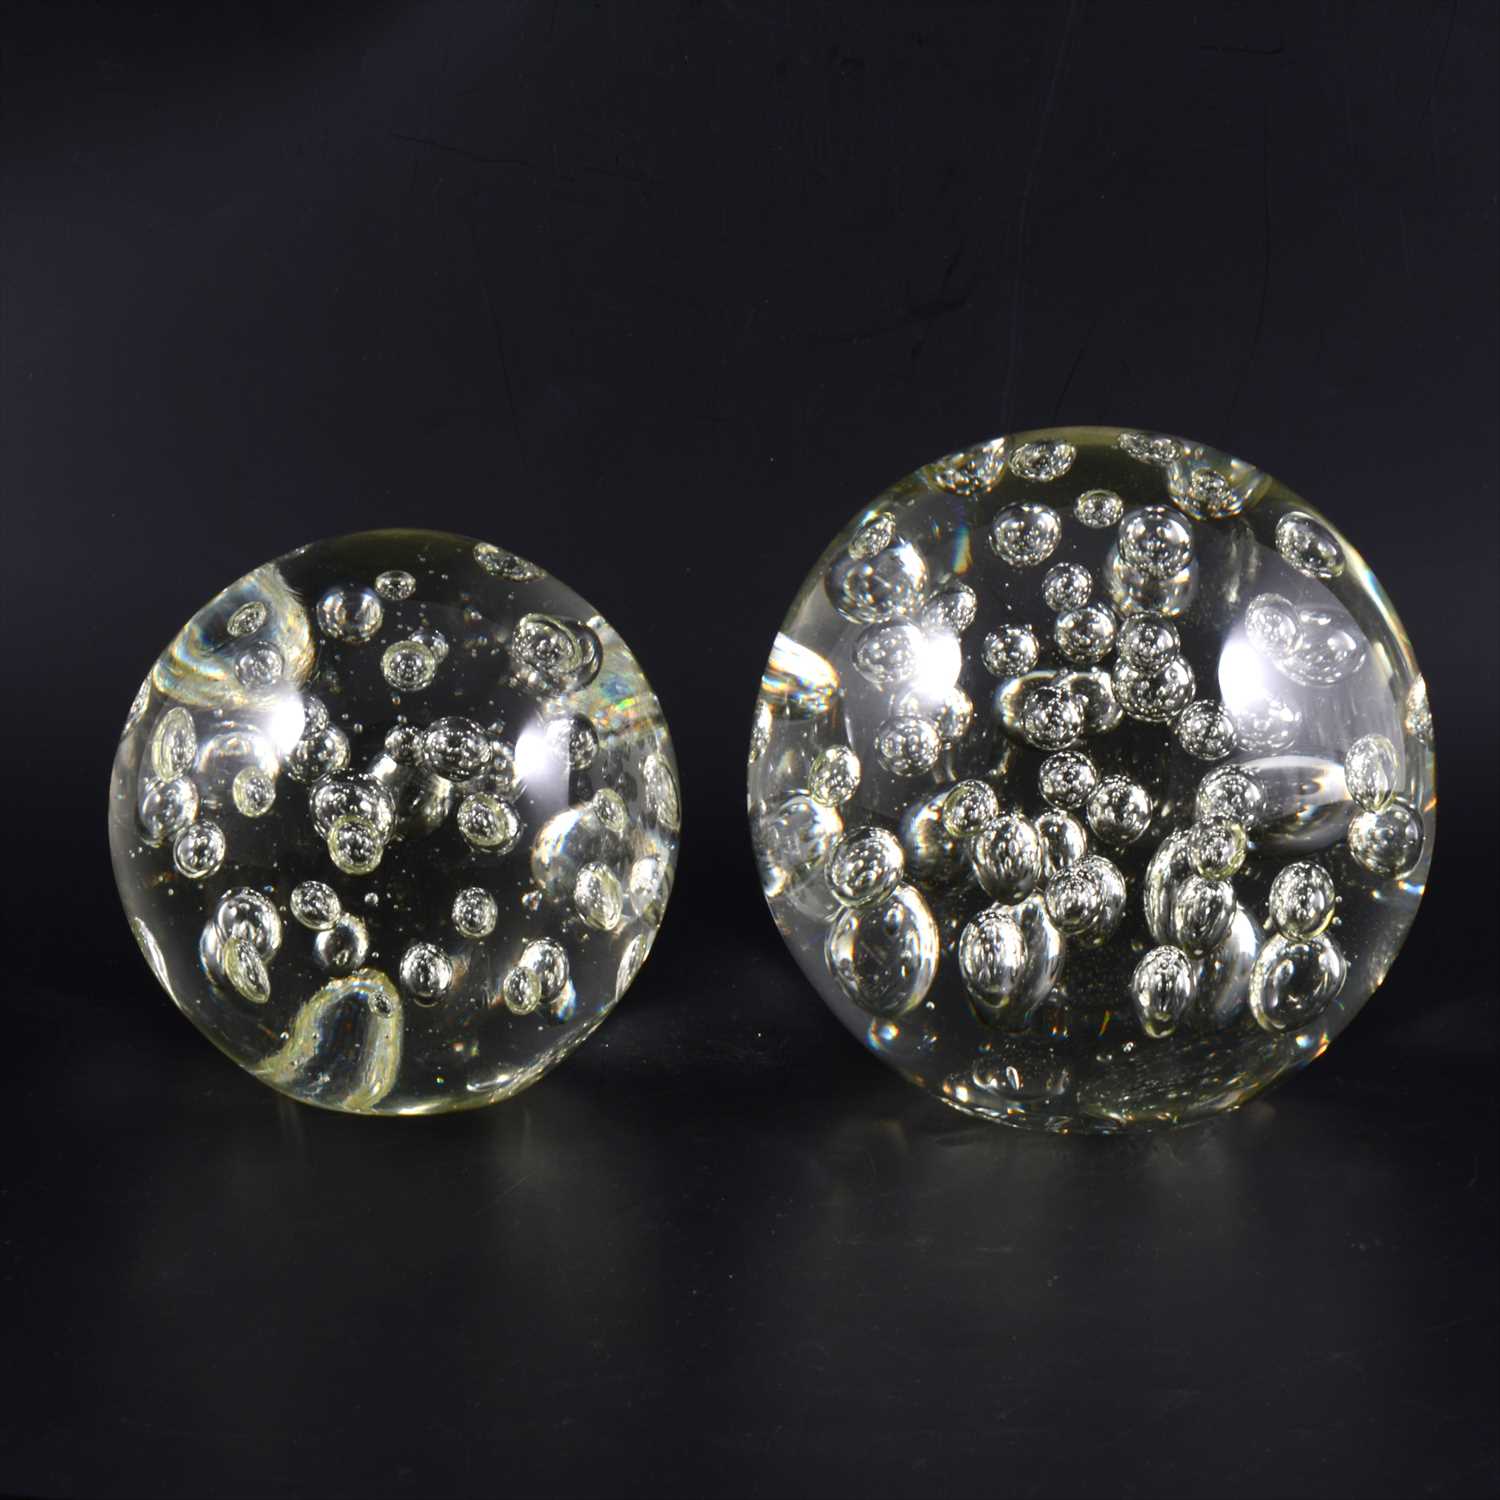 Lot 30 - A large glass dumpy 'paperweight', and another similar